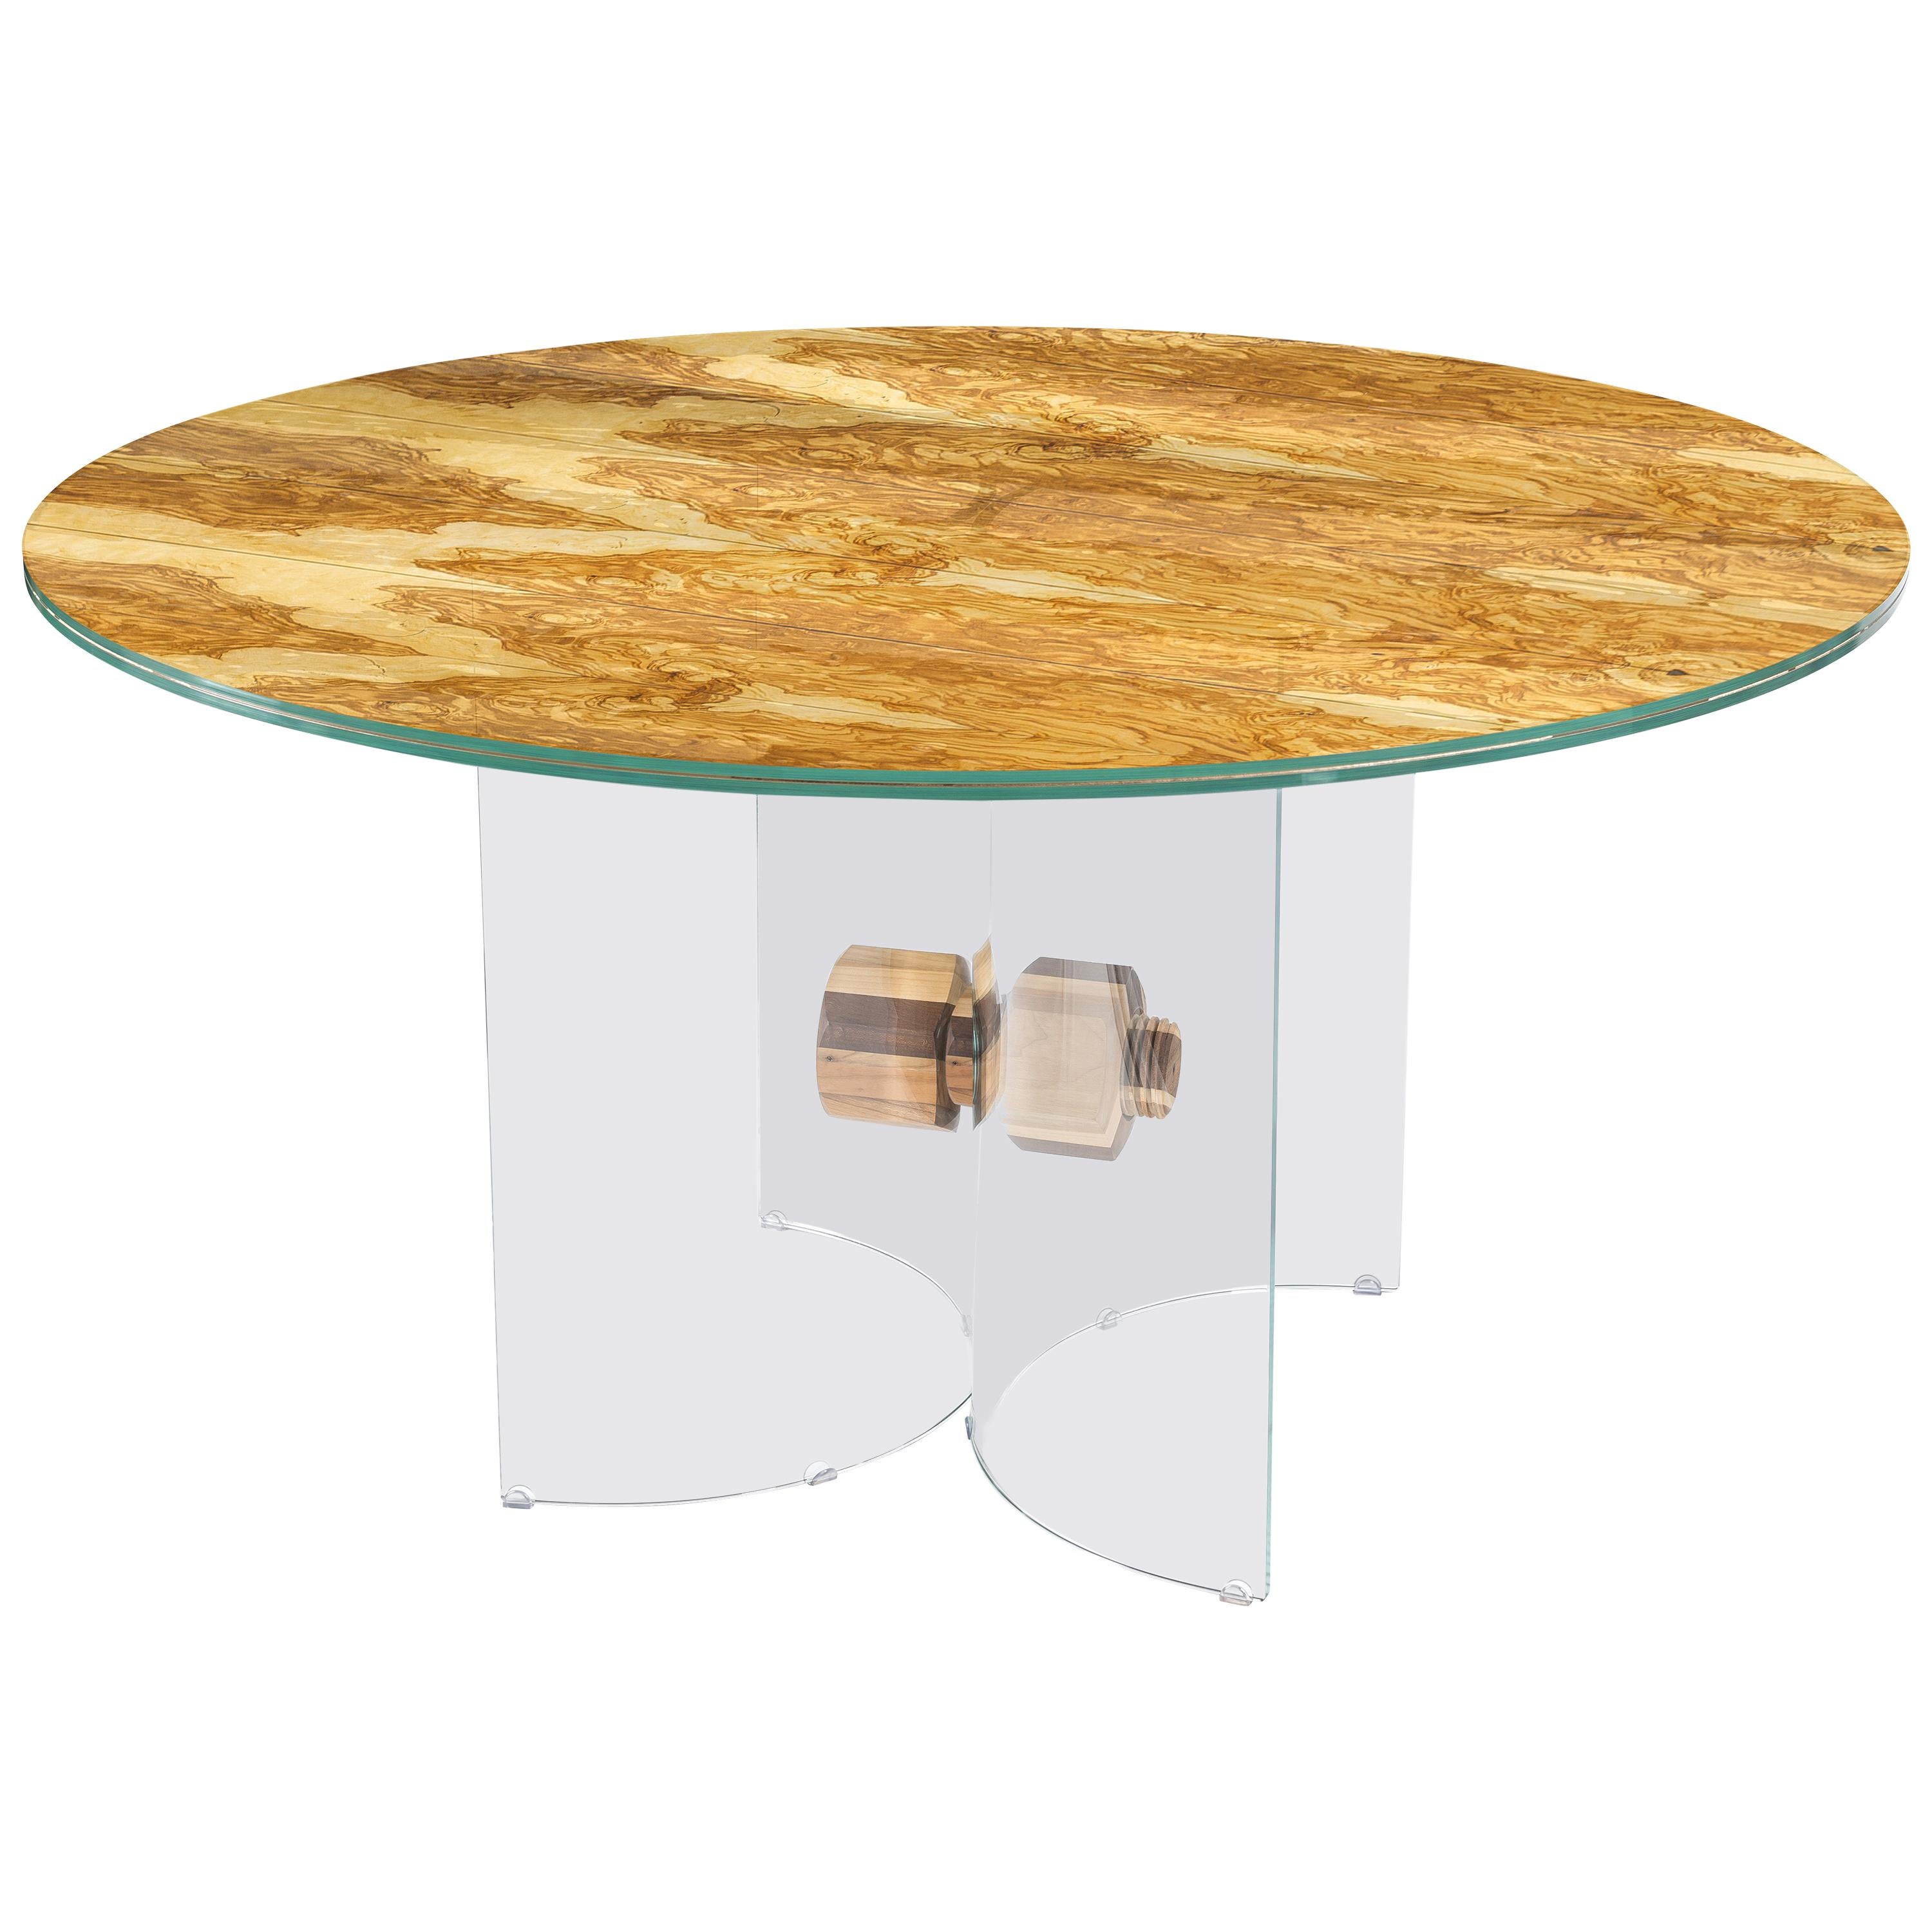 VG-VGnewtrend Tables